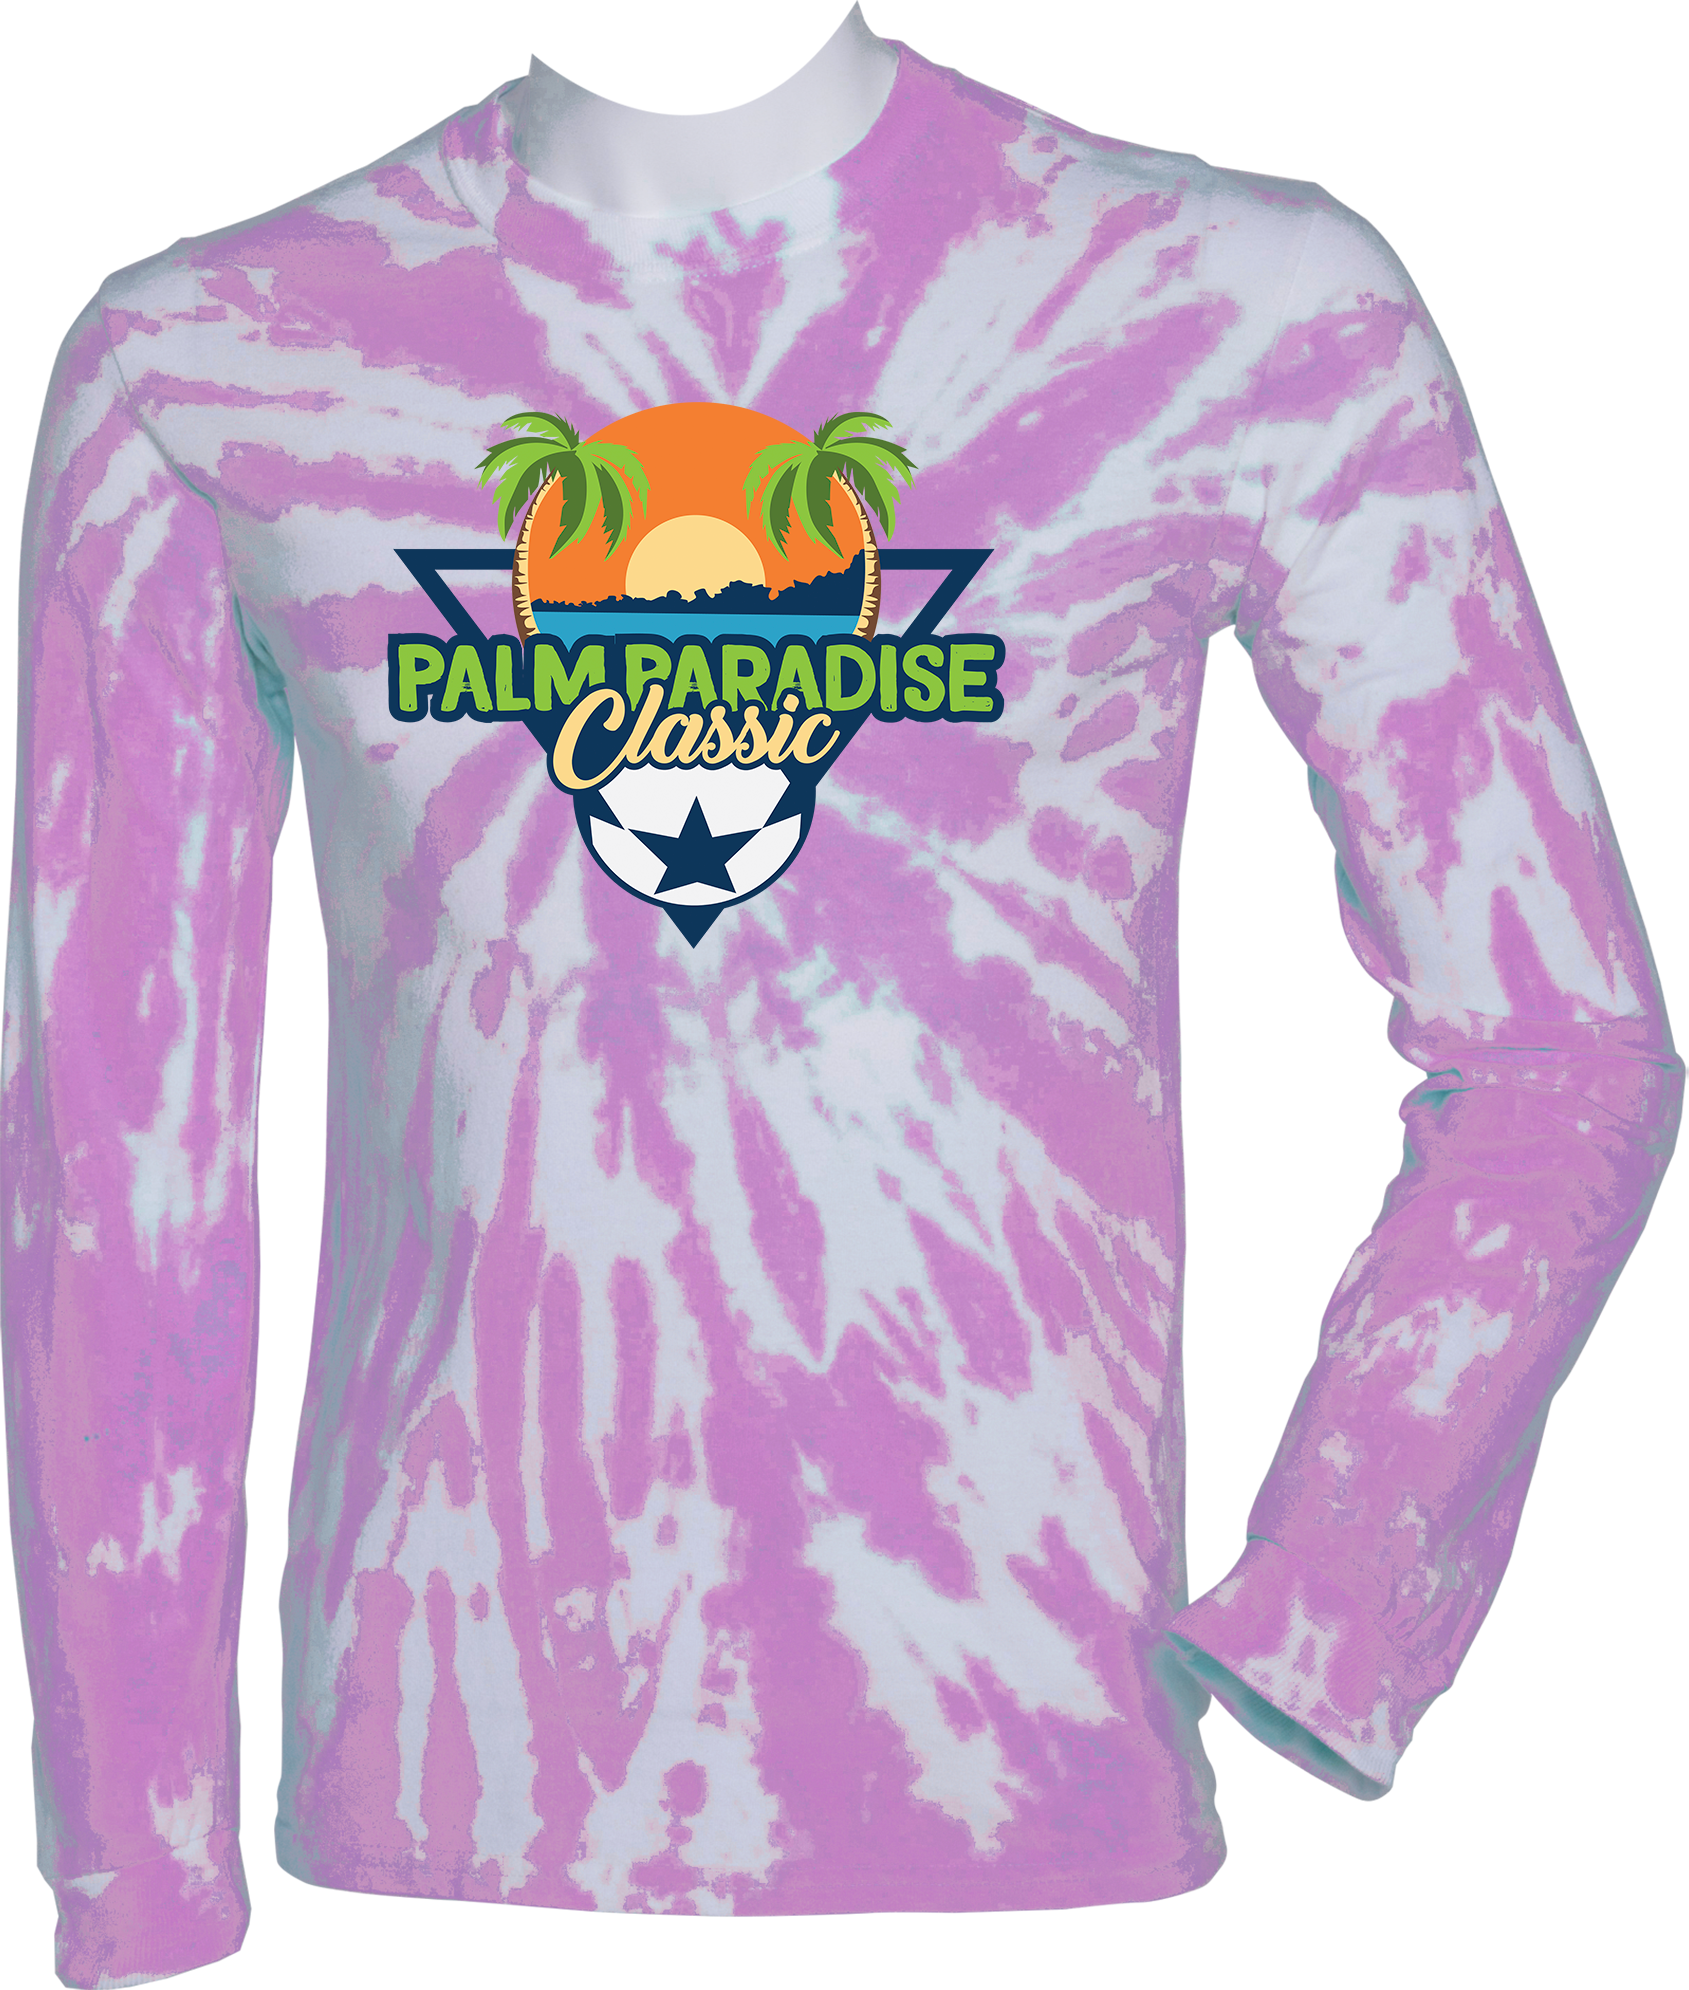 TIE-DYE LONG SLEEVES - 2023 Palm Paradise Classic